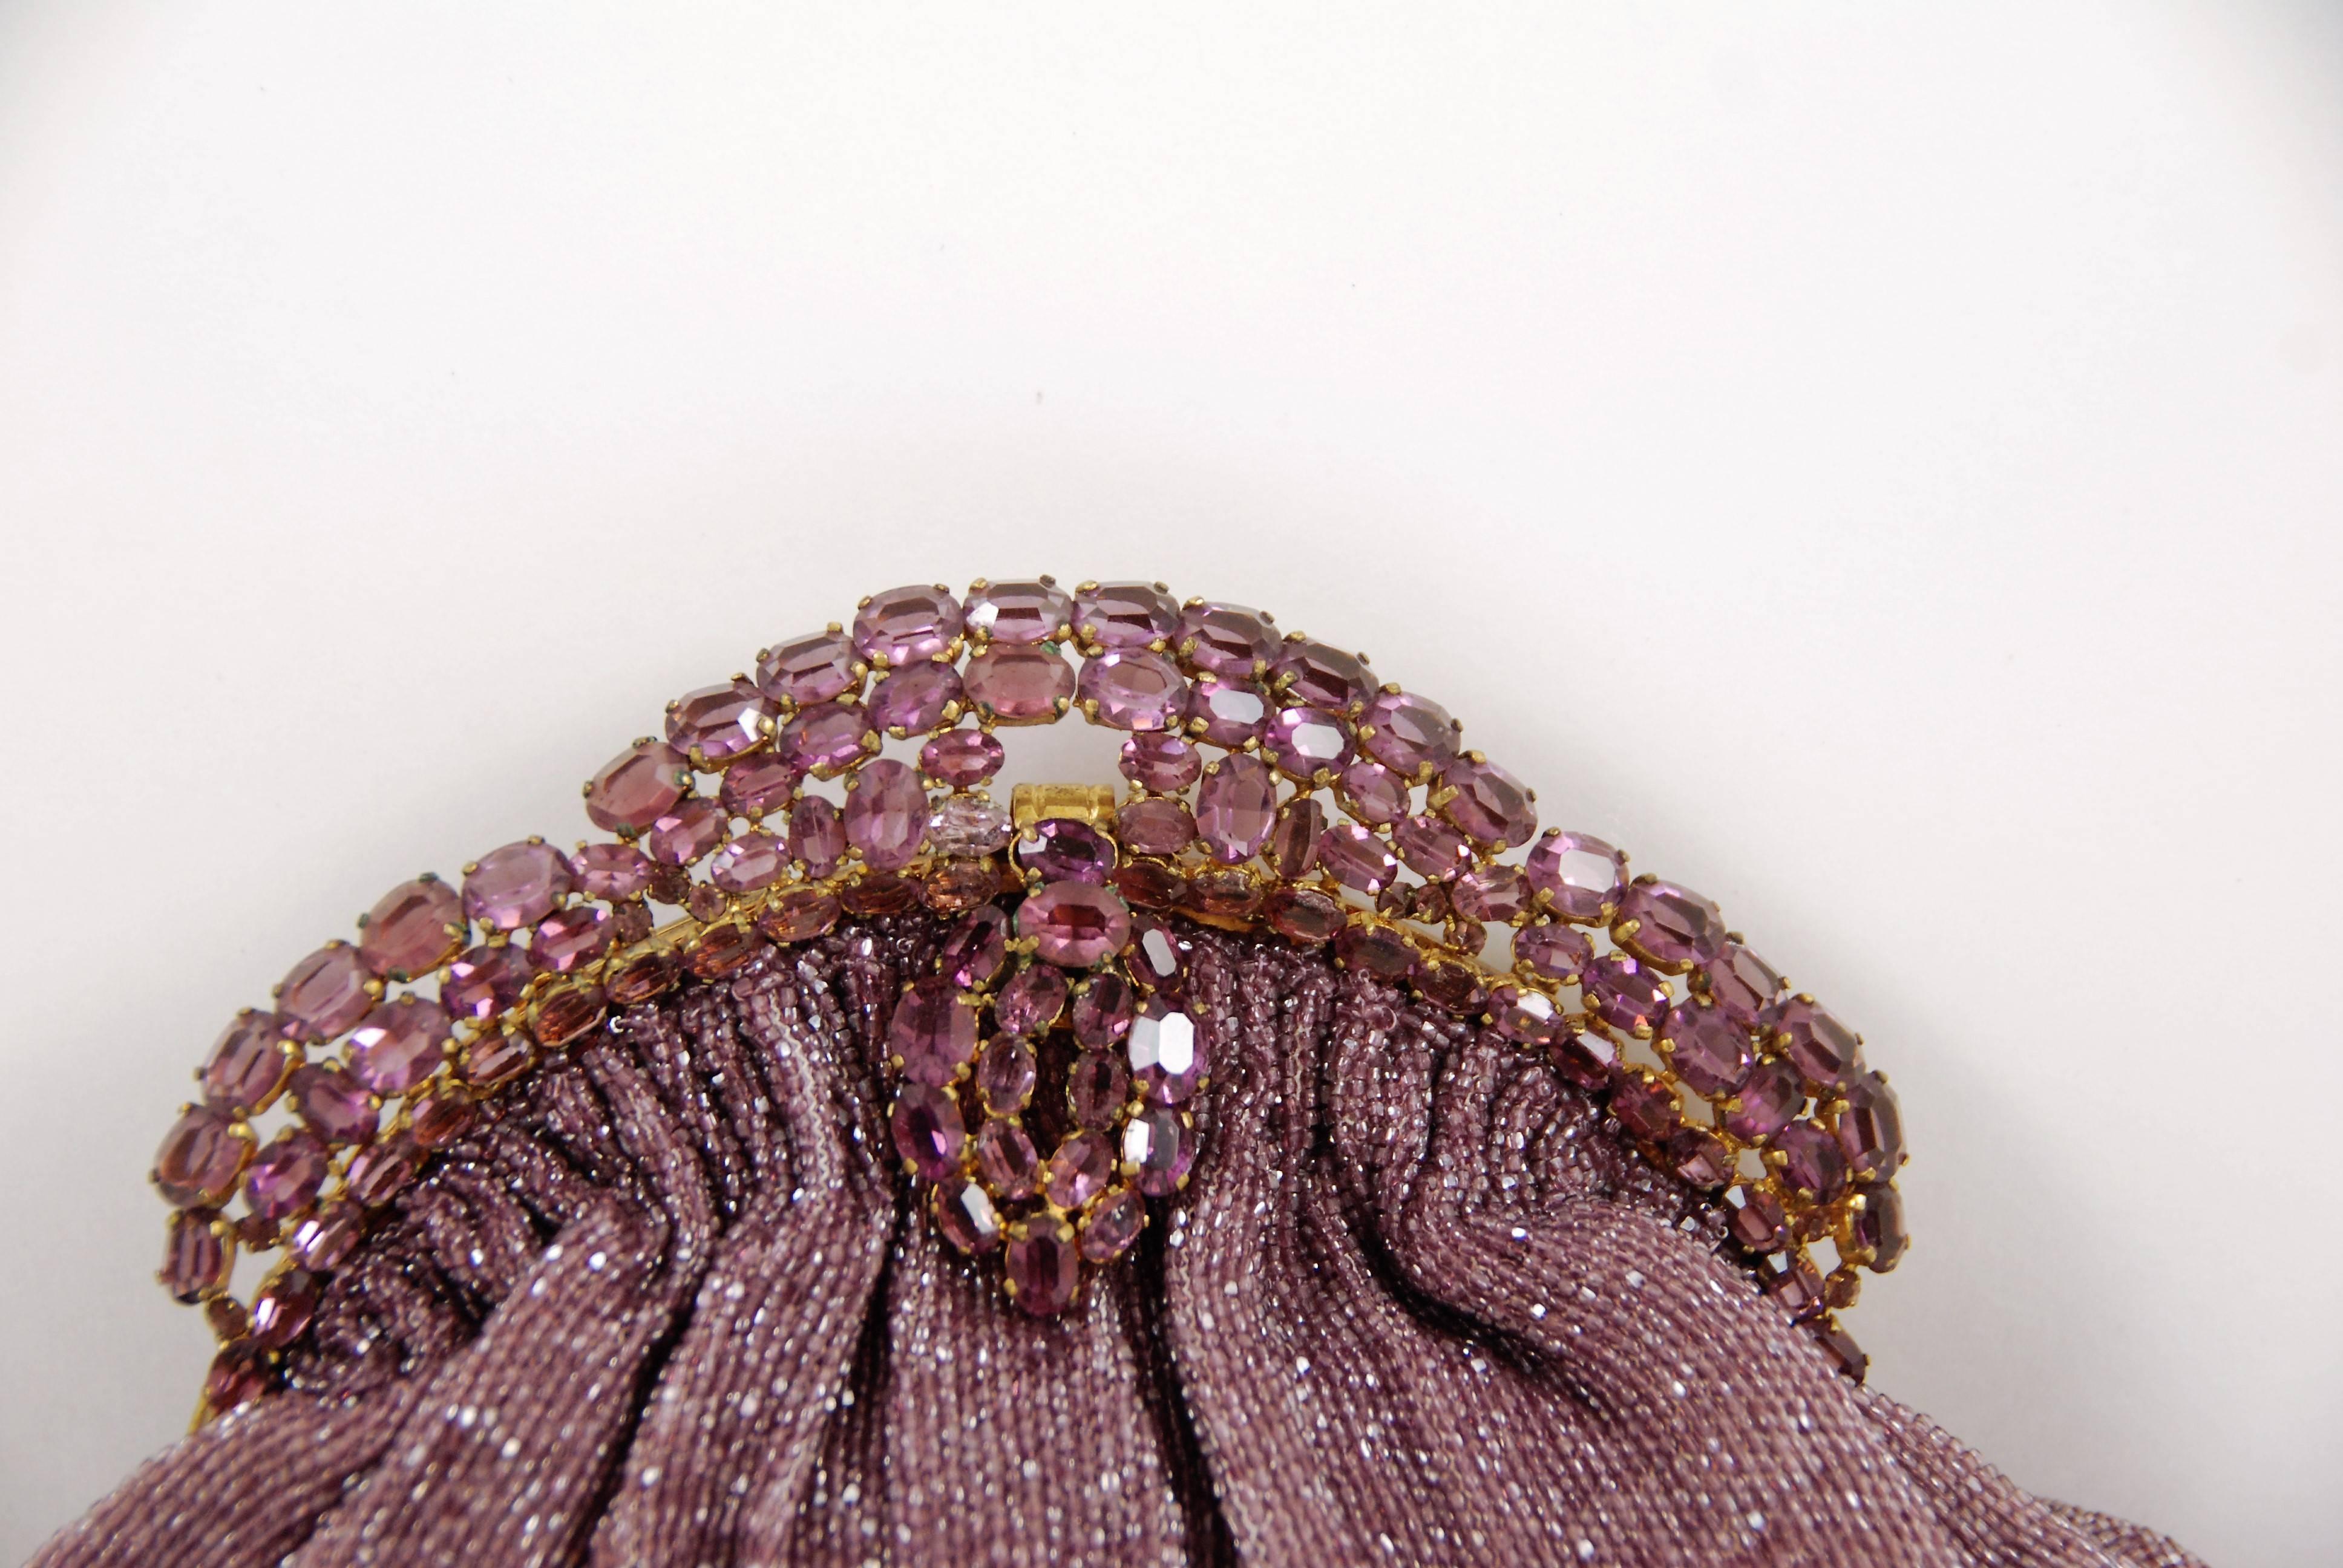 Vintage Josef (tag is missing but I have had these bags before) evening bag in an amethyst color beaded and a jeweled frame of faux amethysts. The frame is reminiscent of a tiara and all the stones are prong set. The amethyst colored beads have